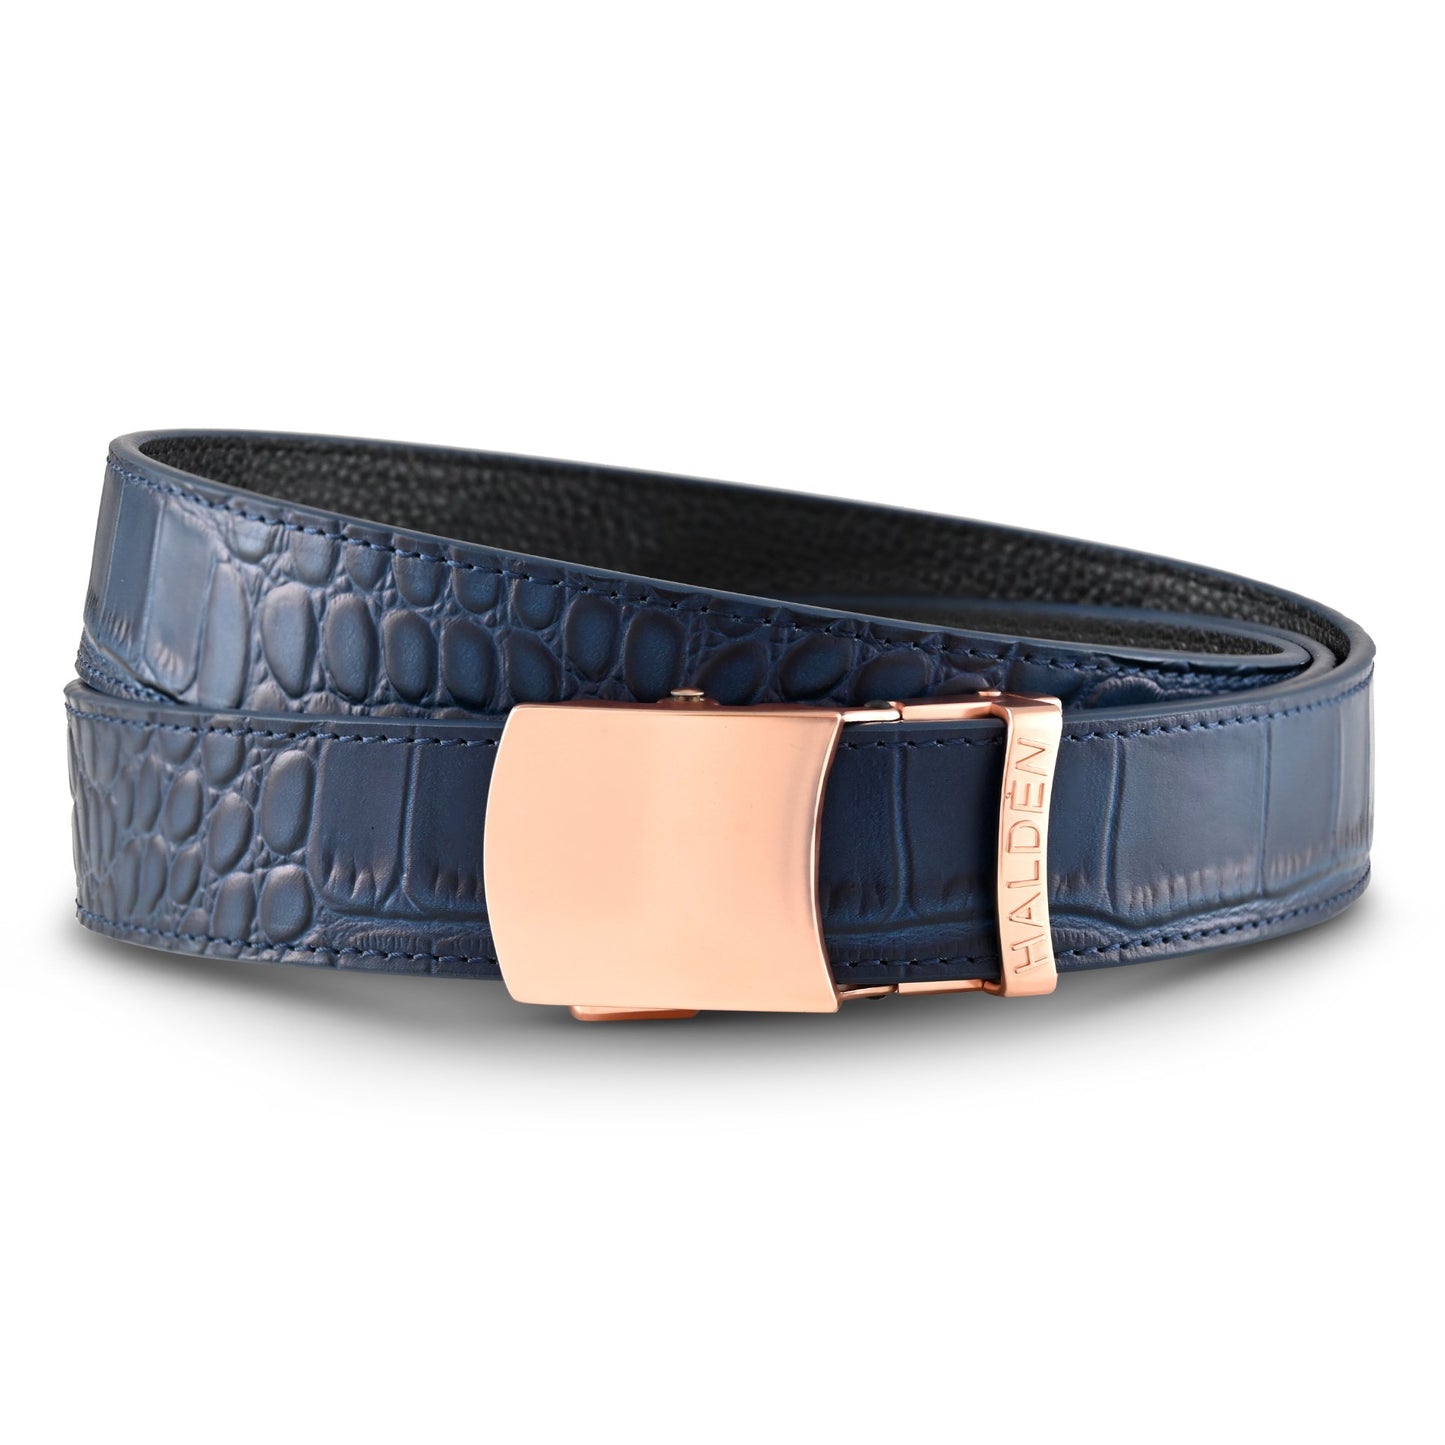 Daven Blue with vintage buckle